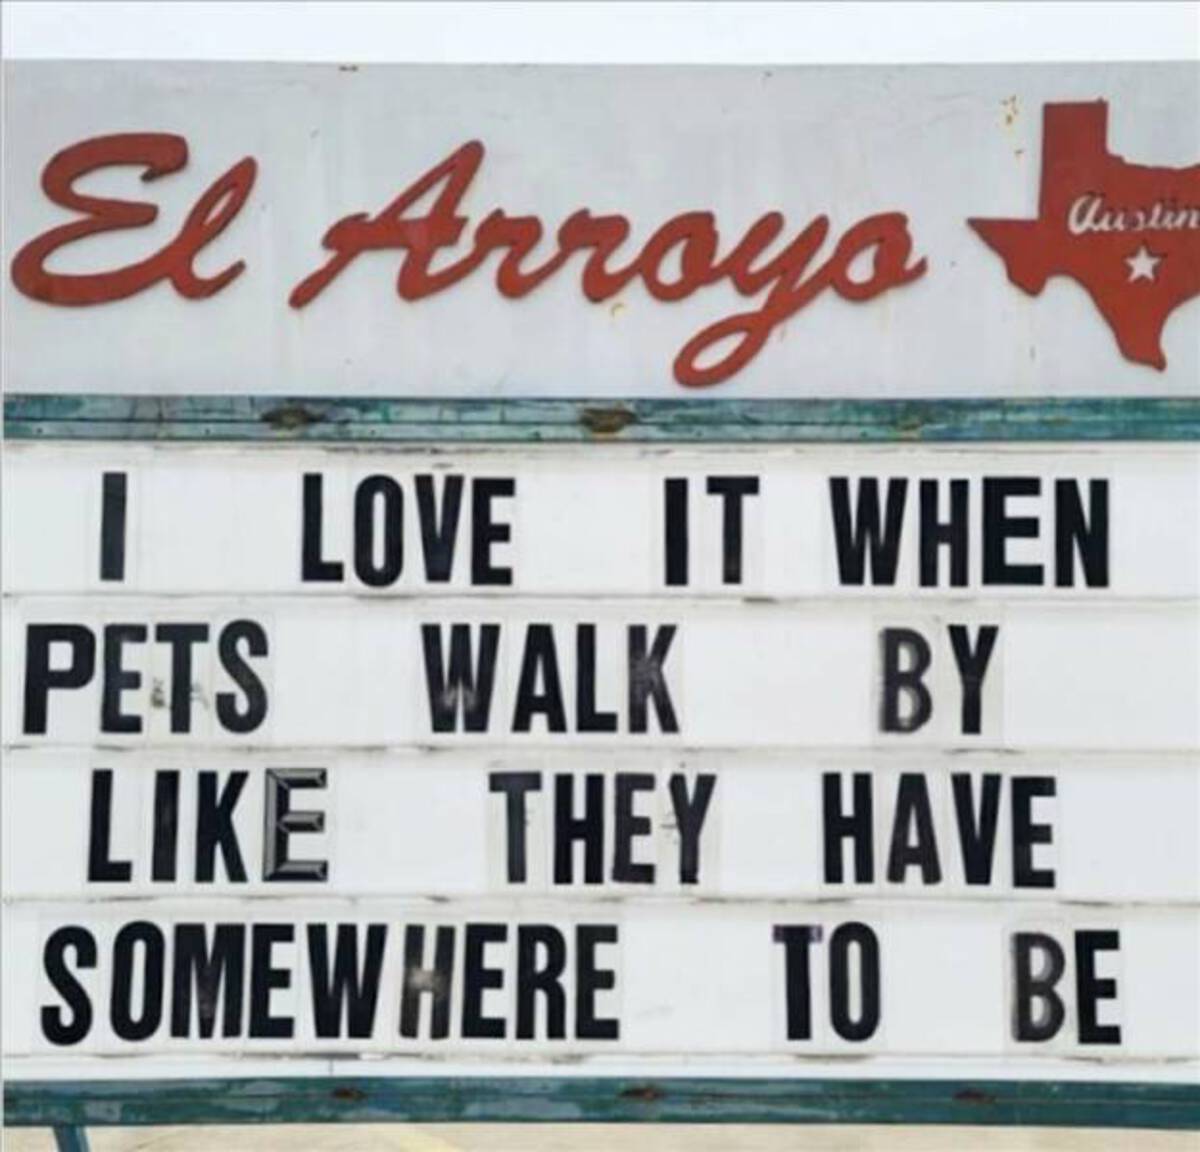 signage - El Arroyo Austin I Love It When Pets Walk By They Have Somewhere To Be k